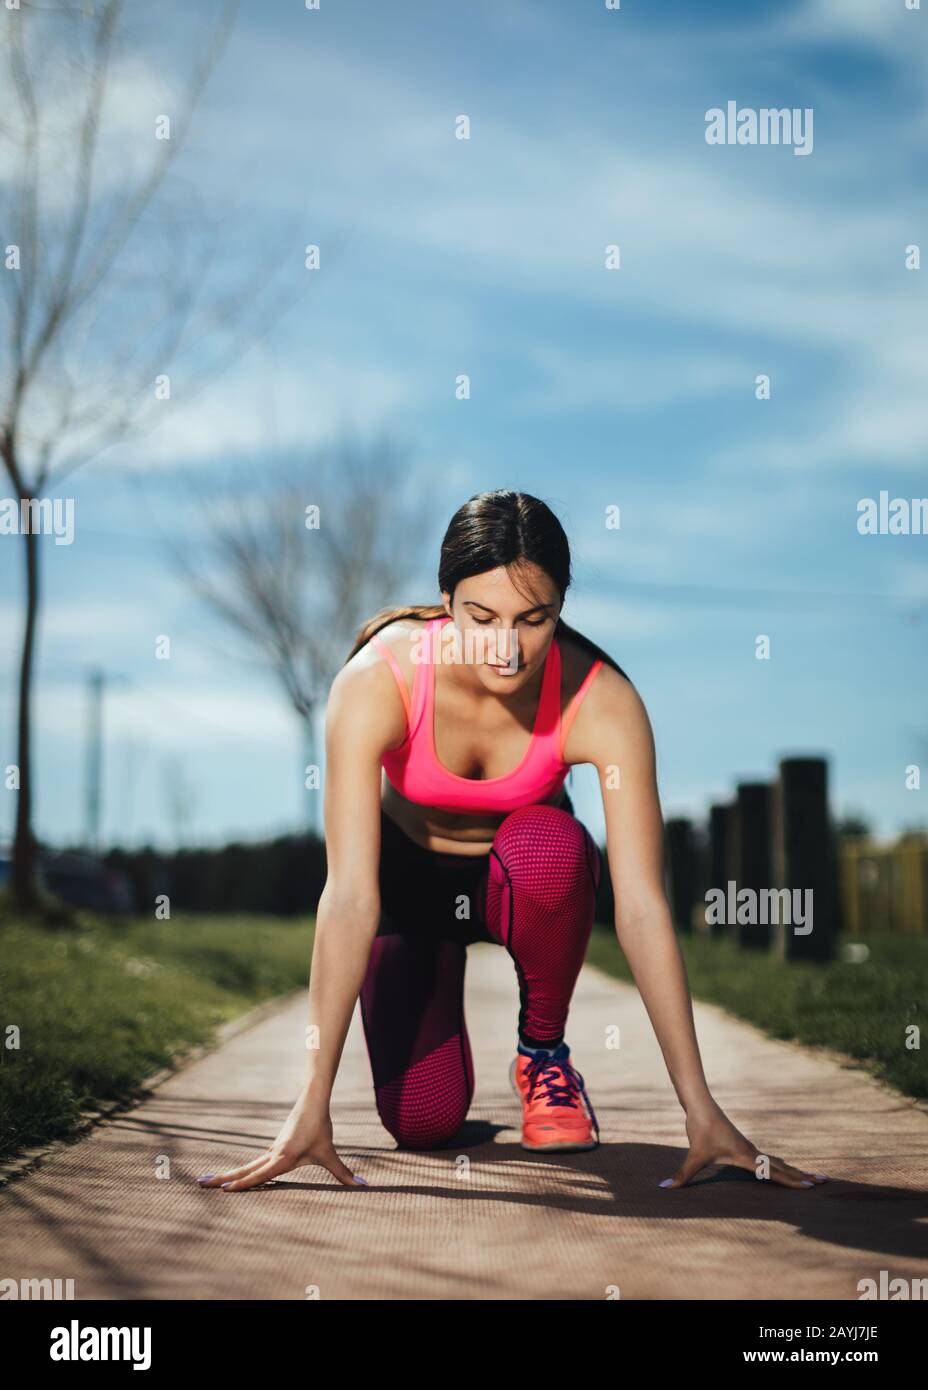 Young athlete woman preparing to start running. Female jogger in start position on the track in park. Healthy recreation concept. Stock Photo